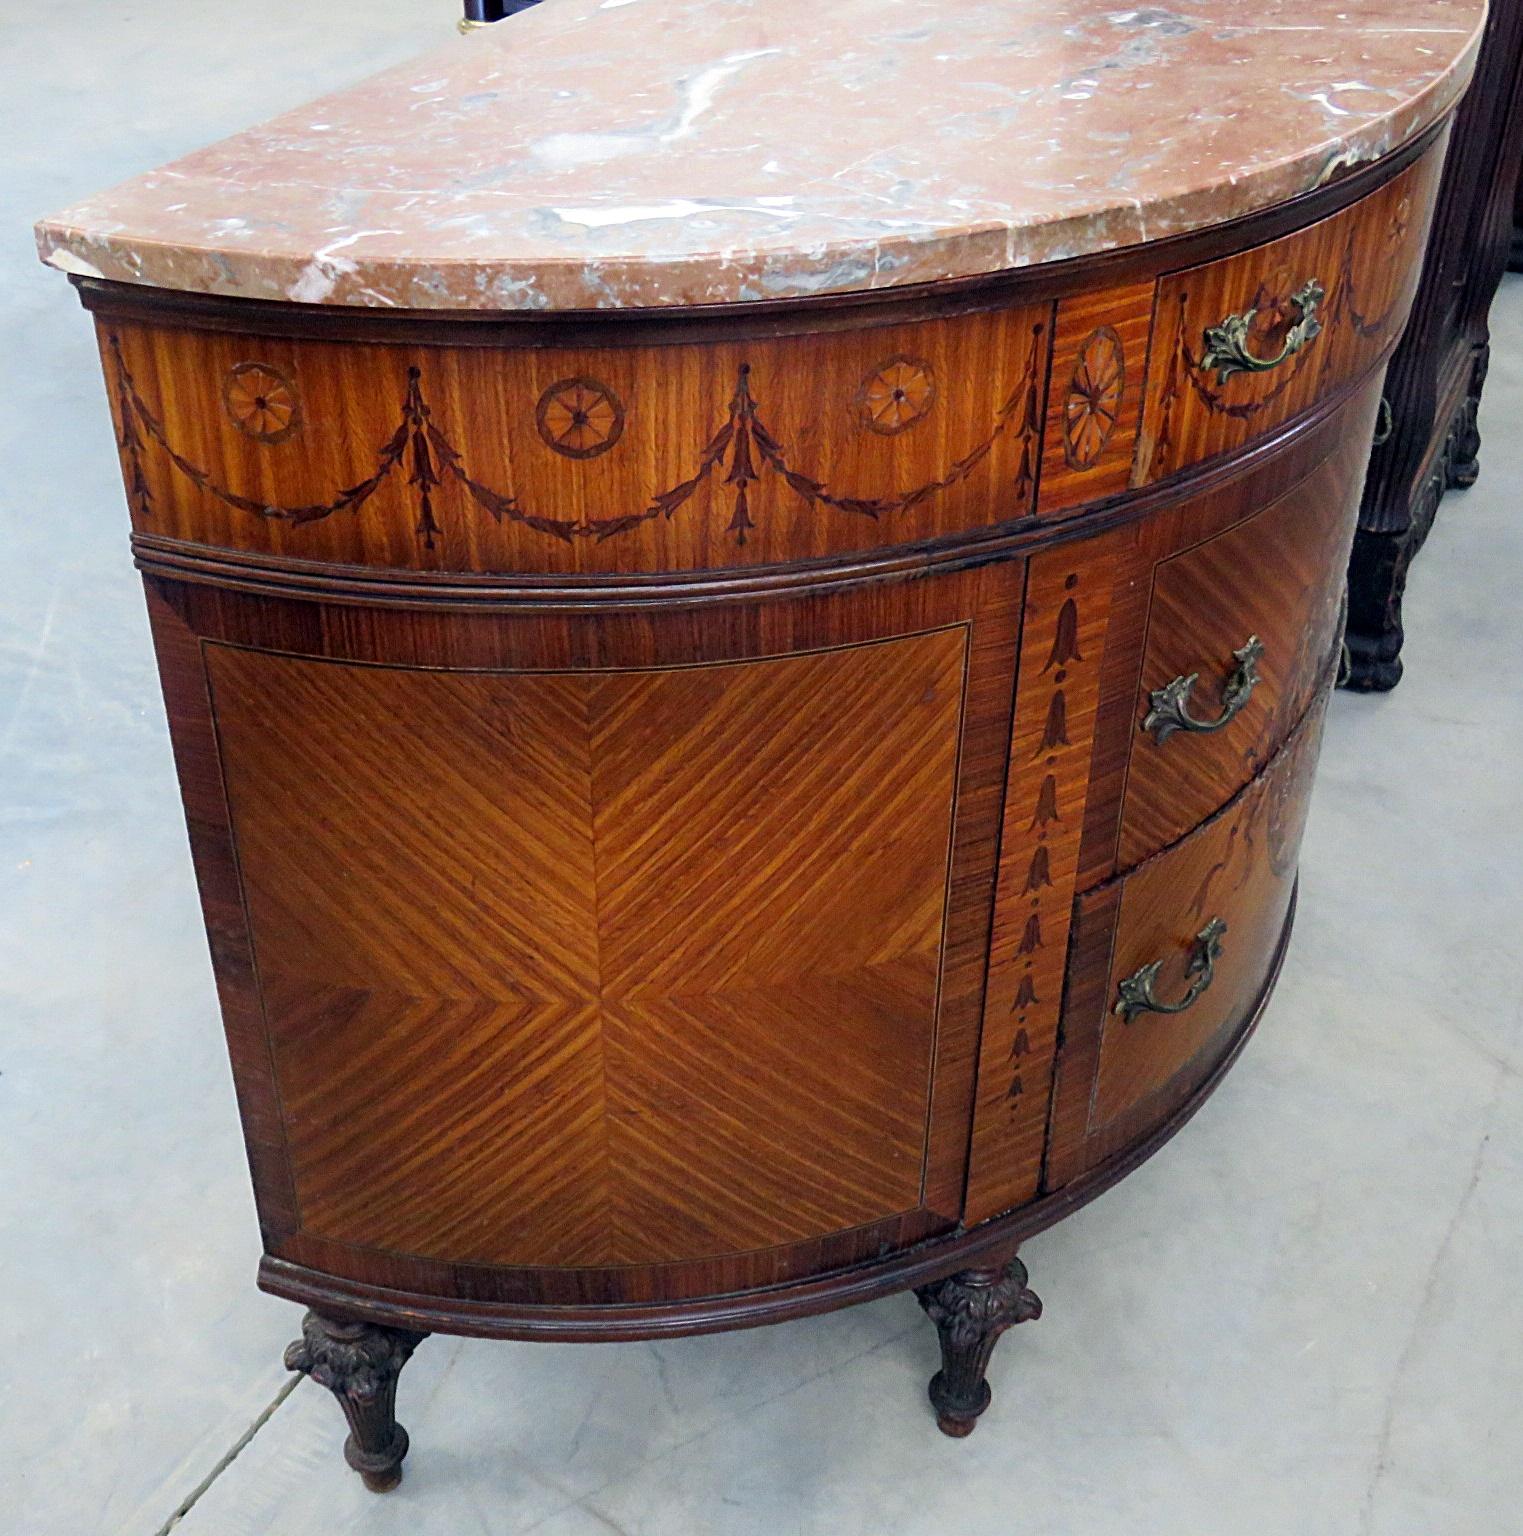 English Adams Style Inlaid Satinwood Marble Top Demilune Commode Buffet Dresser